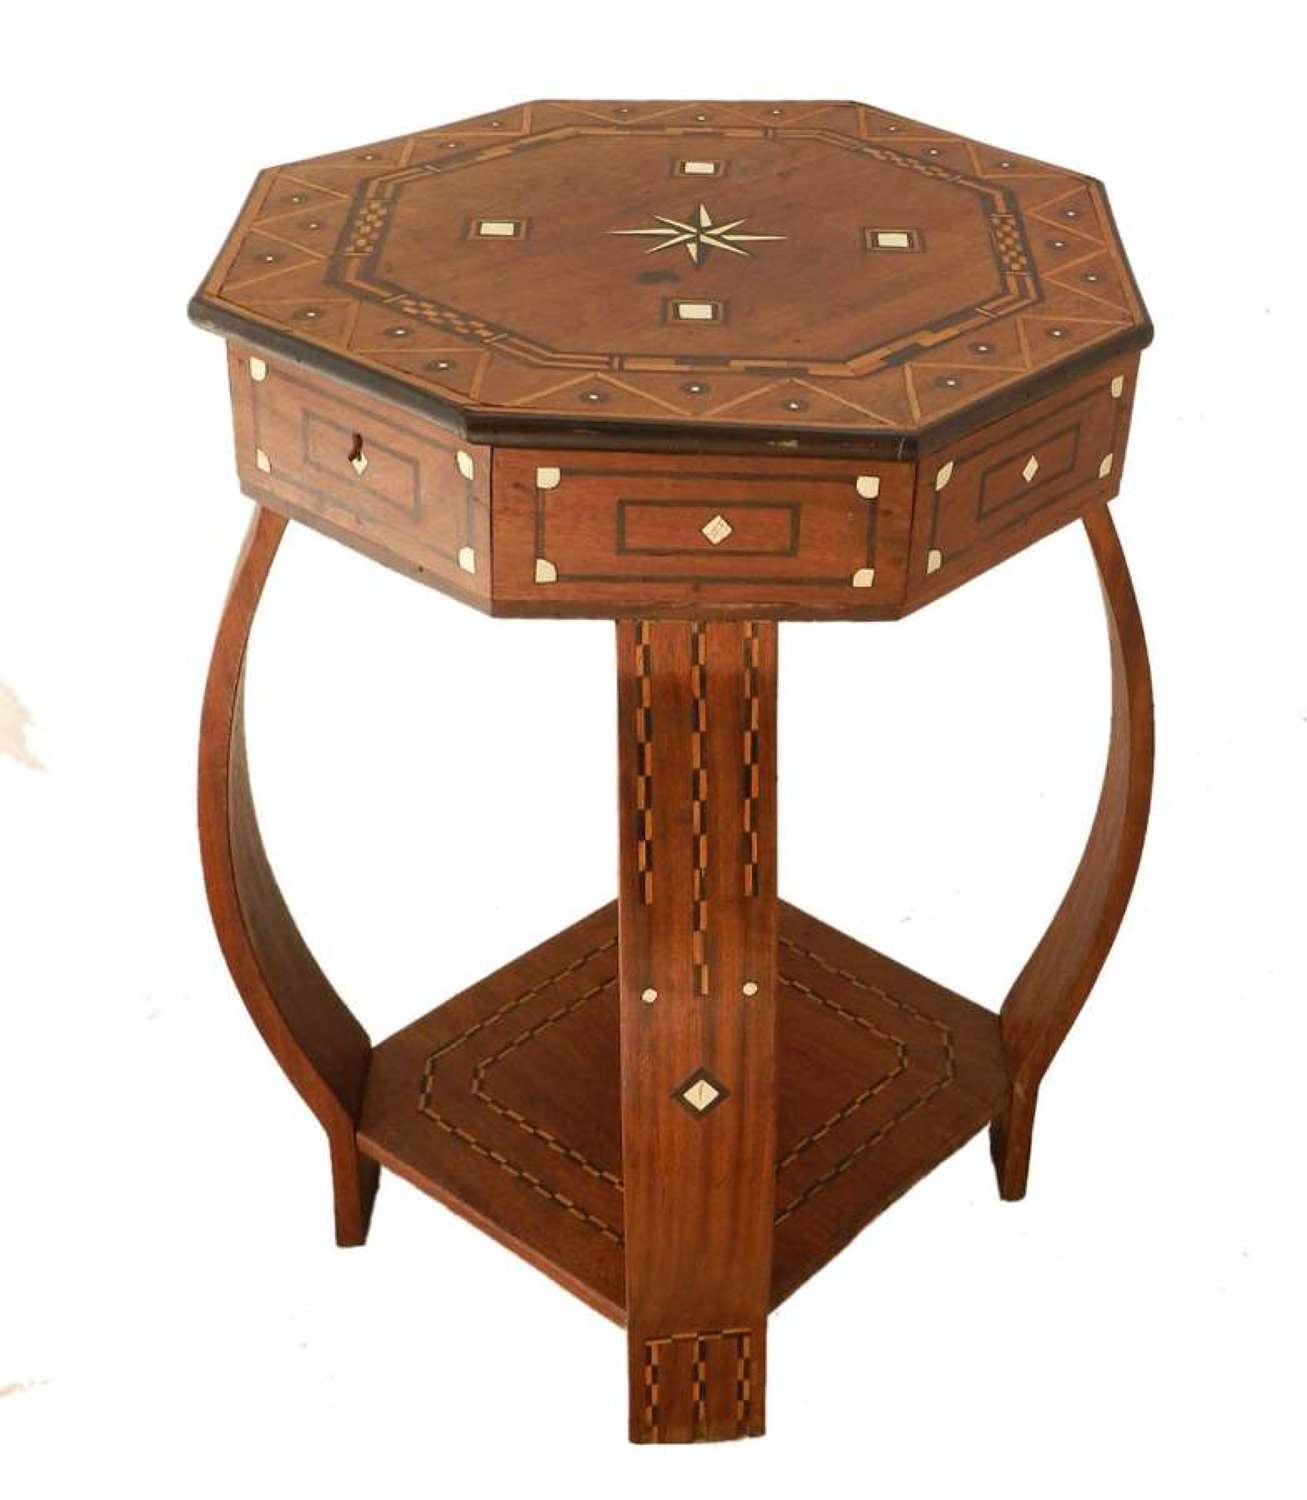 Moroccan Inlaid Side Table early 20th Century Games or Sewing